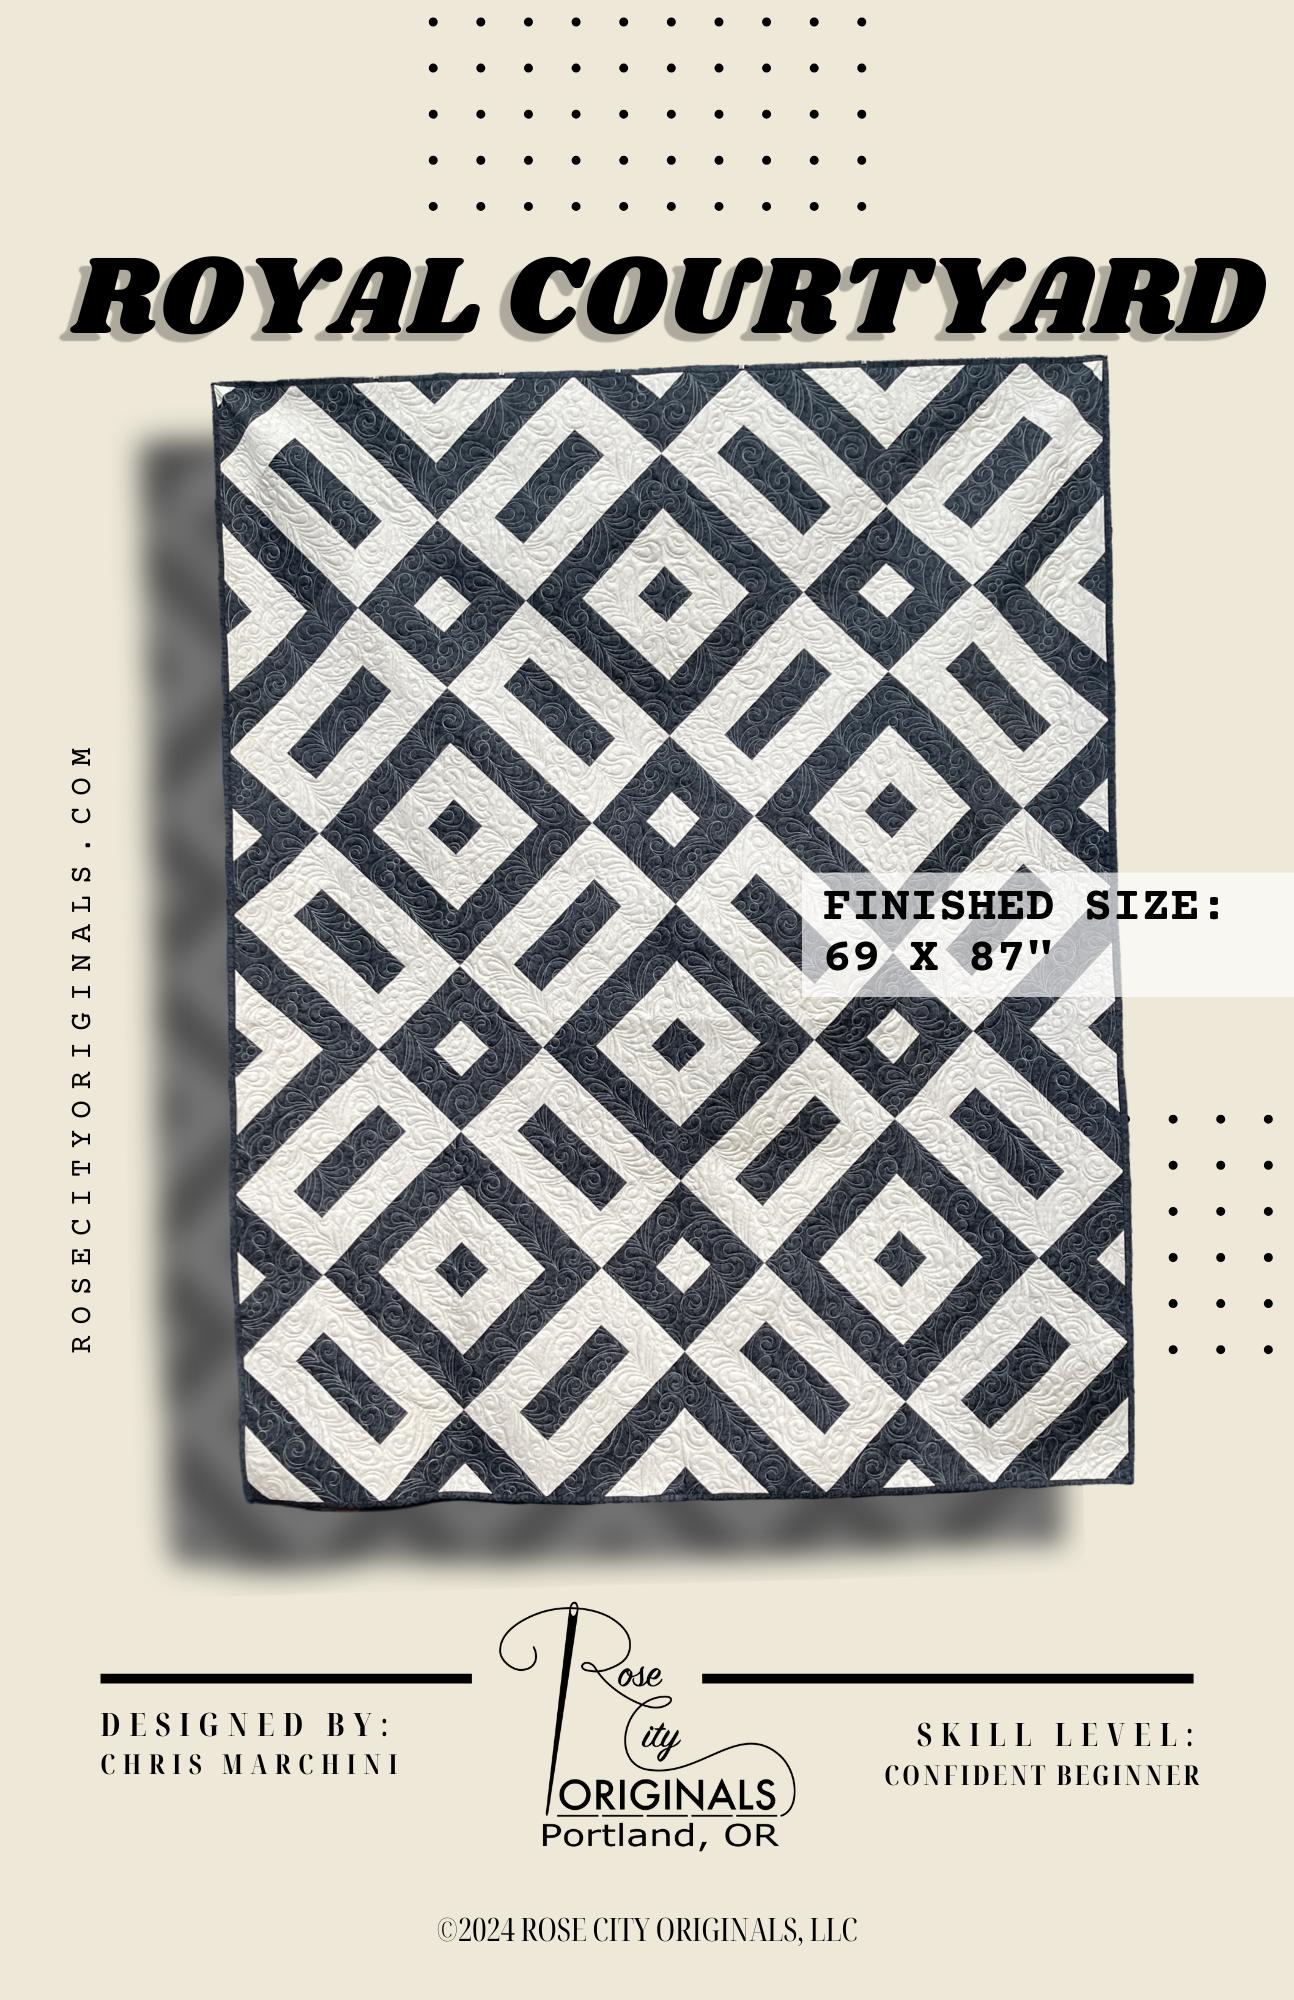 Royal Courtyard - Patchwork Quilt Pattern - Printed Booklet